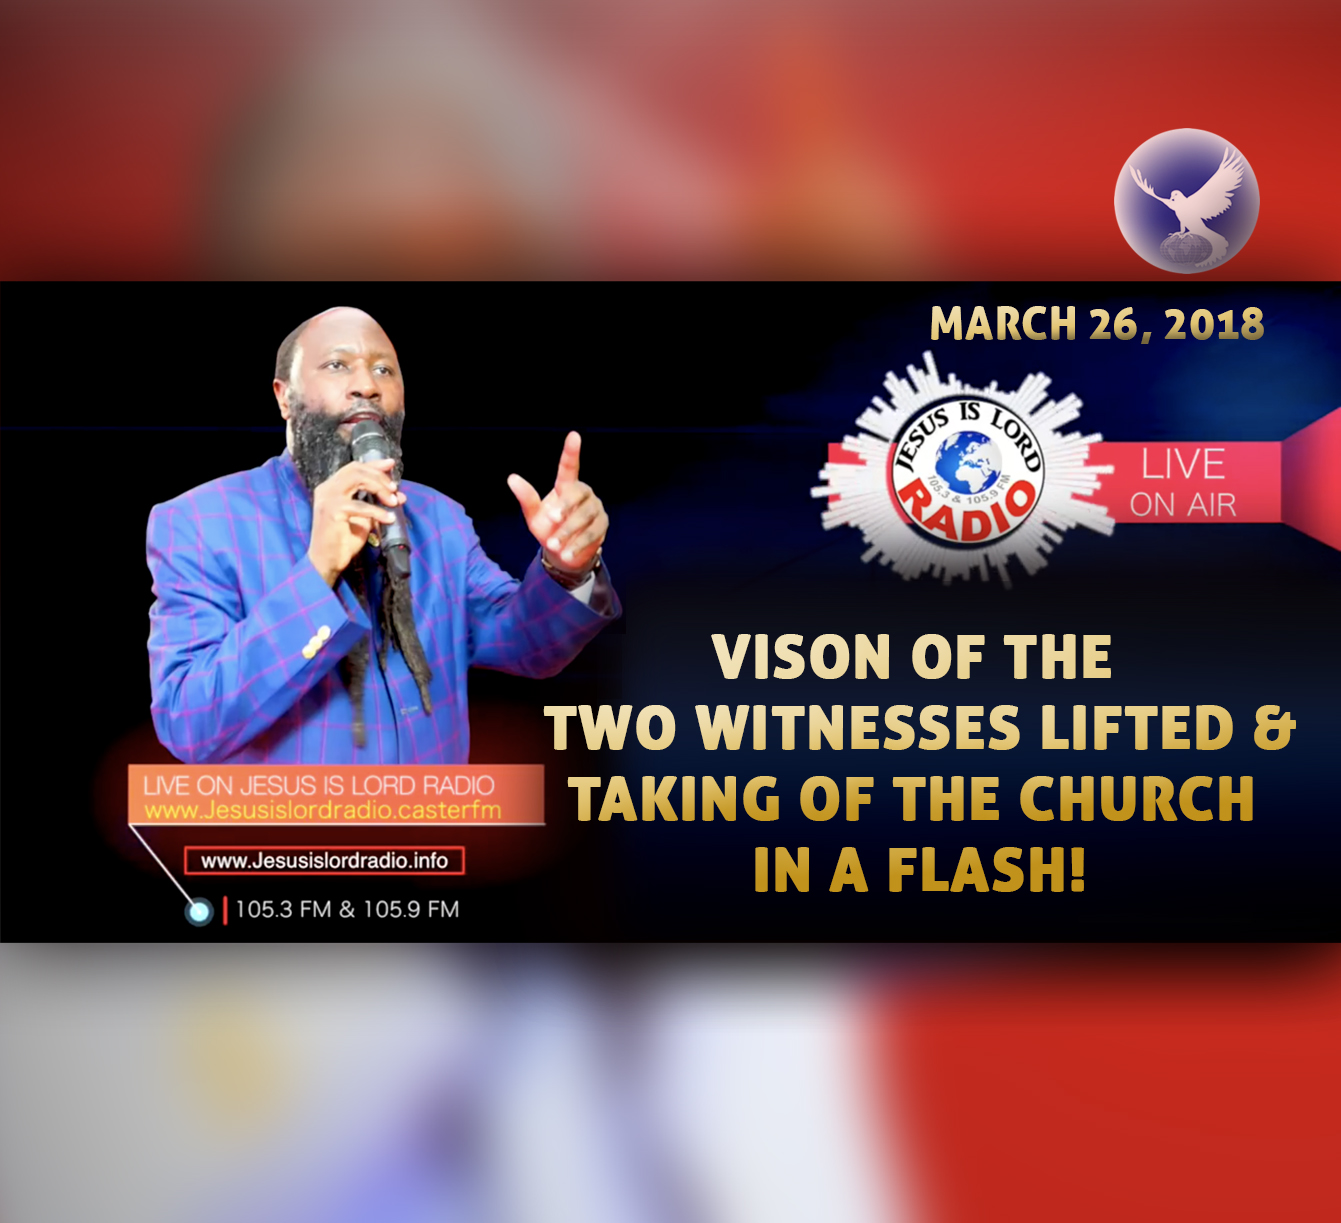 EPISODE 154 - PART 5: VISION OF THE TWO WITNESSES LIFTED AND THE TAKING OF THE CHURCH IN A FLASH (26MAR2018) - PROPHET DR. OWUOR